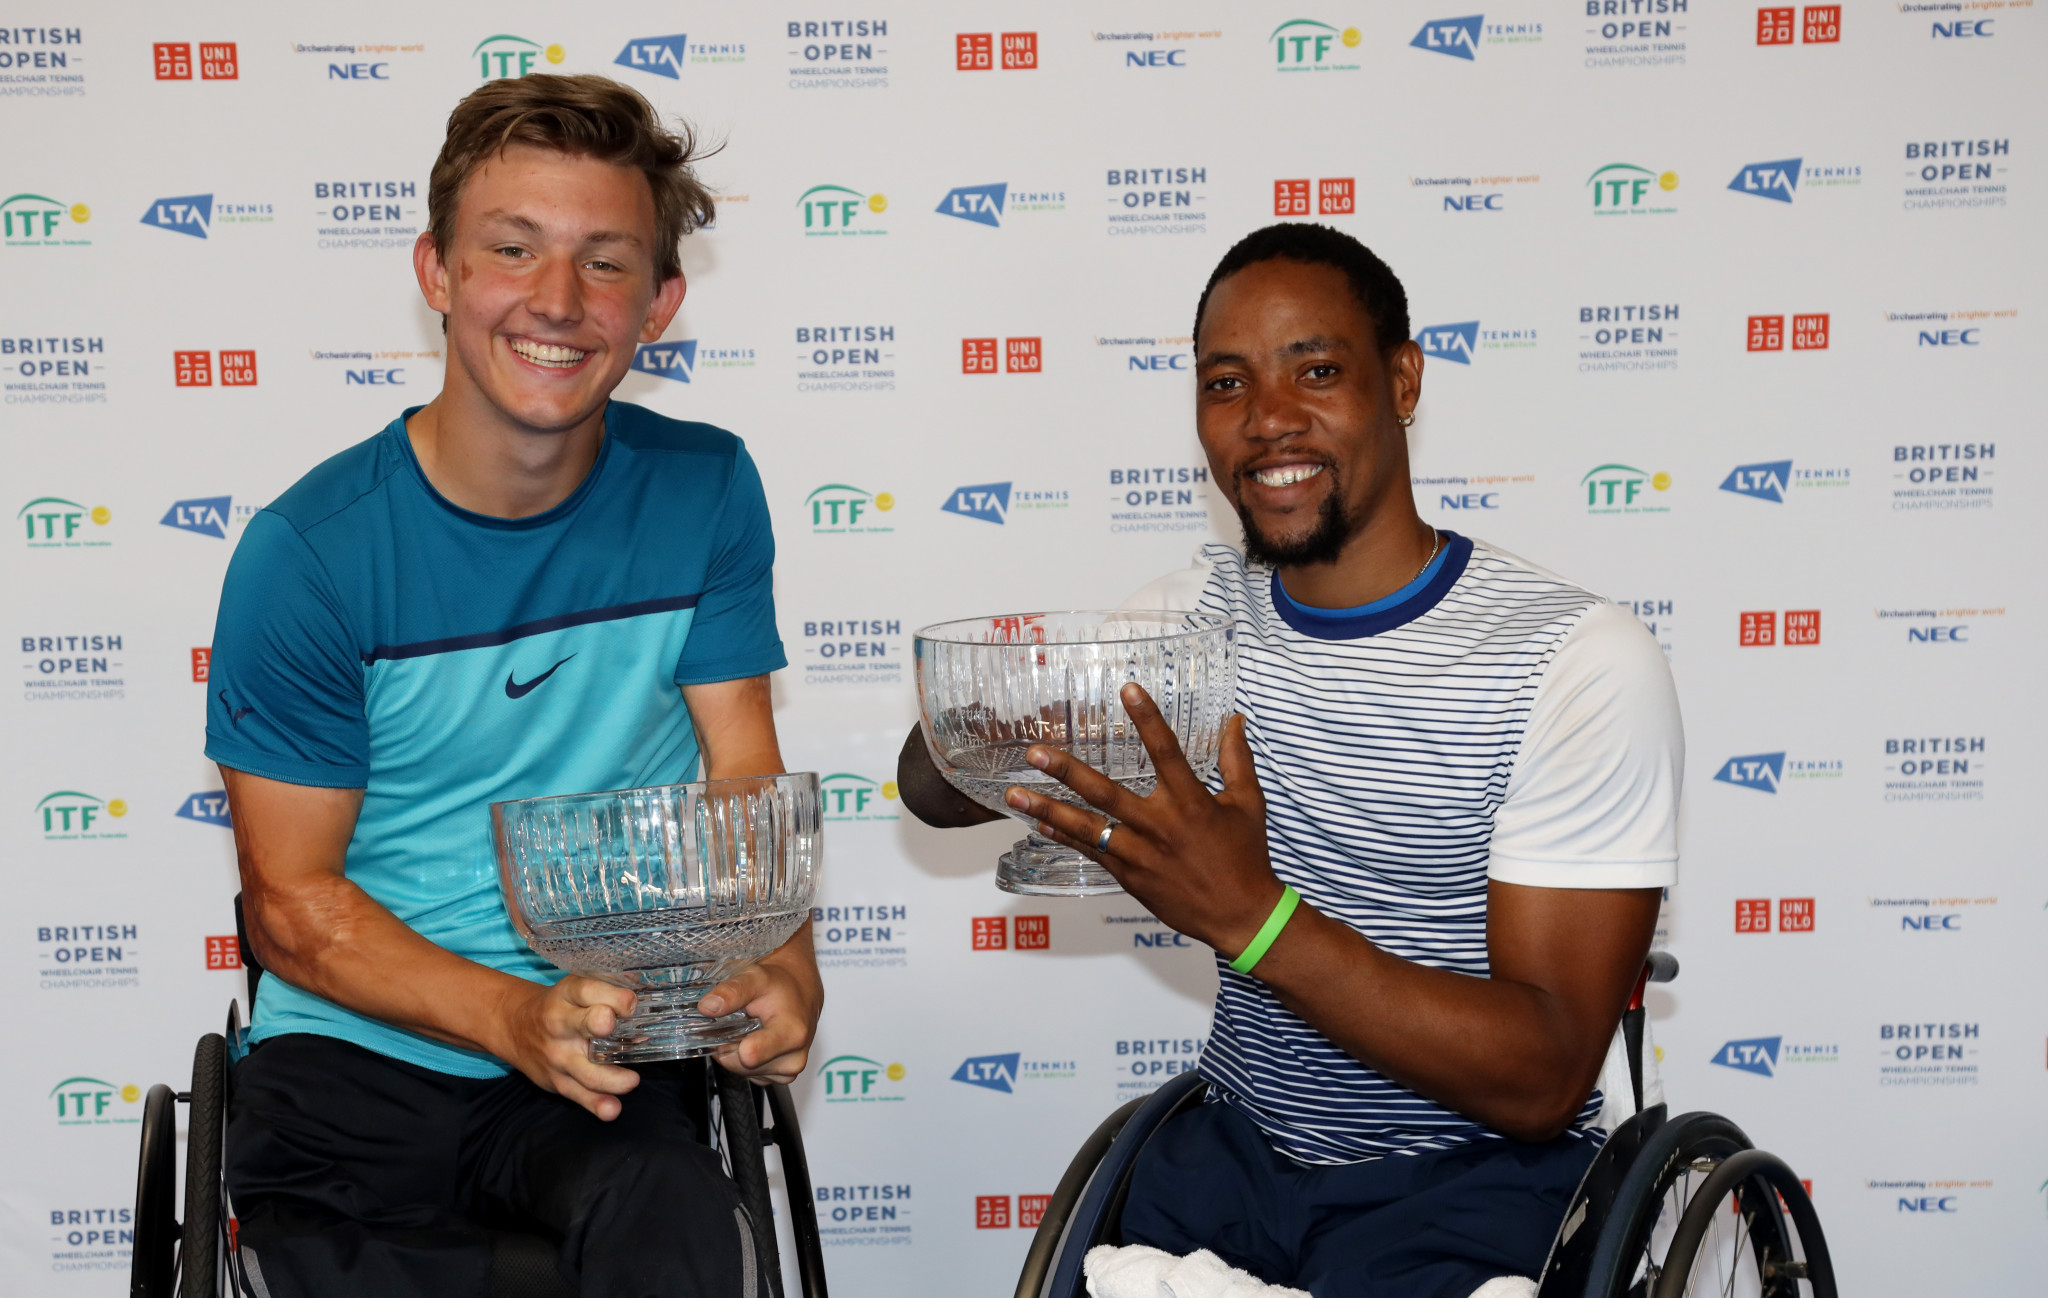 Sixteen-year-old Vink victorious in quad doubles final at rain-affected British Open Wheelchair Tennis Championships